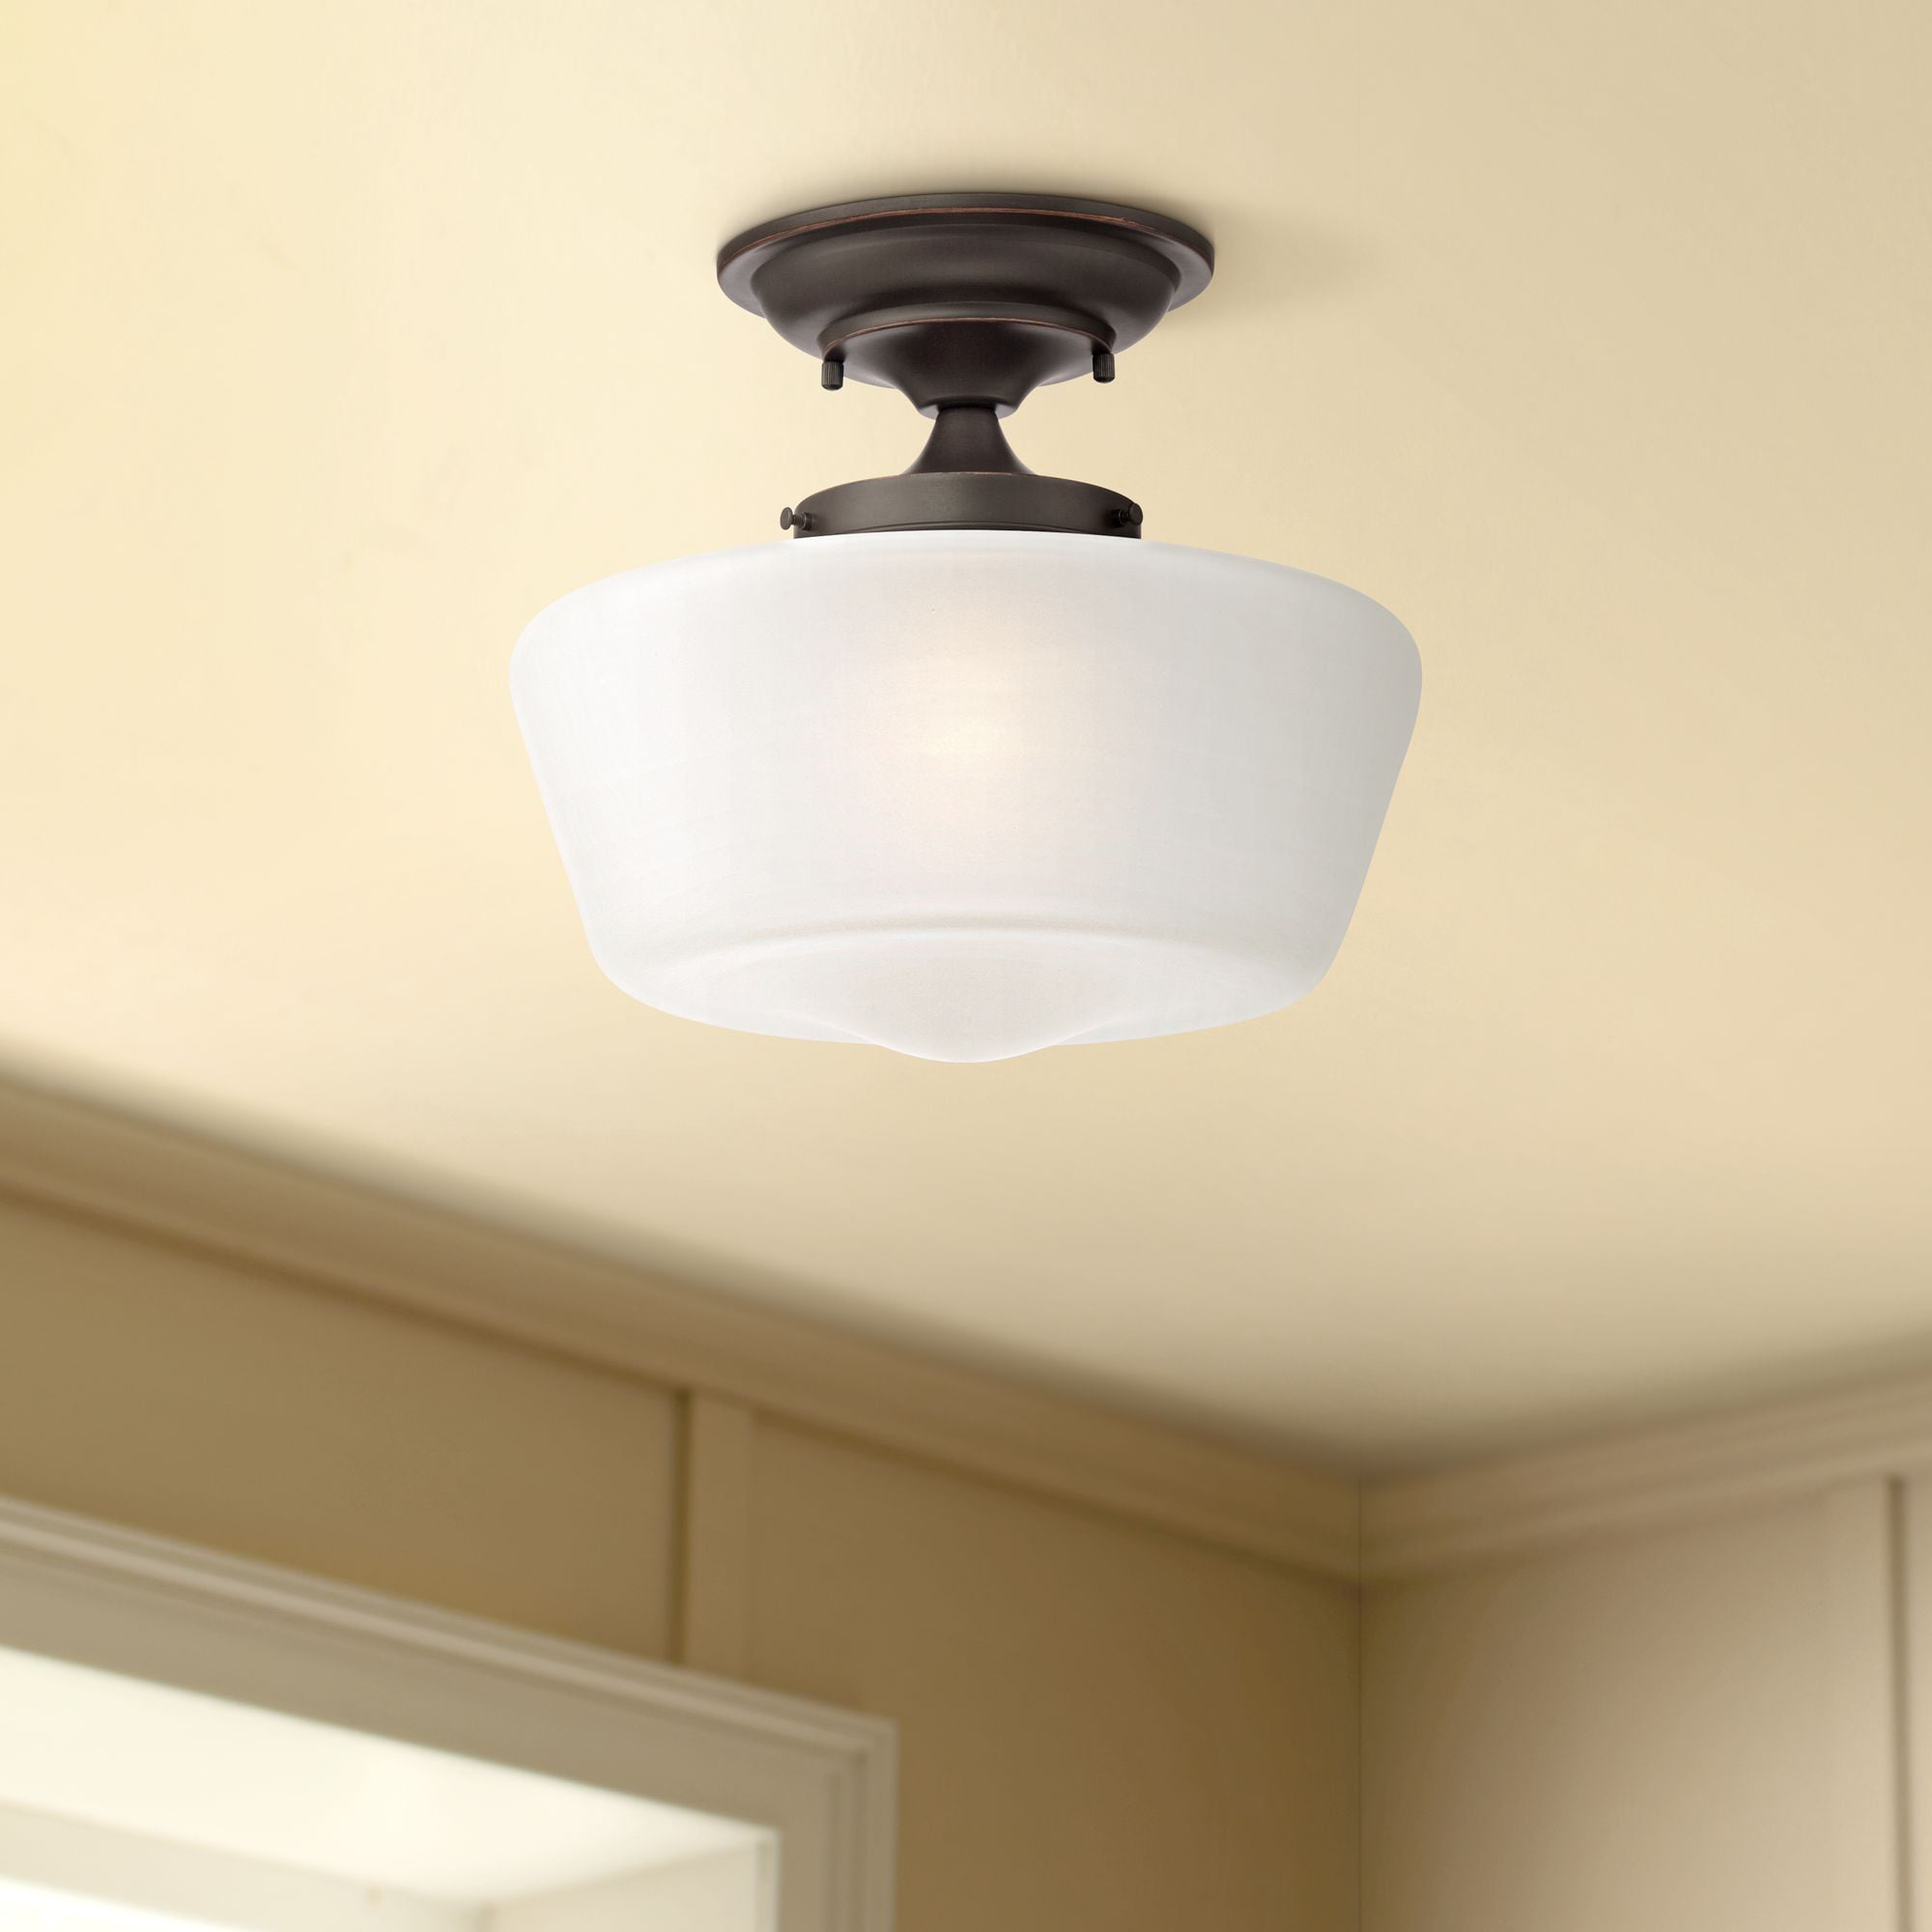 1-Light LED Flush Mount Ceiling Light in Black Finish with White Frosted Glass Shade 10 in